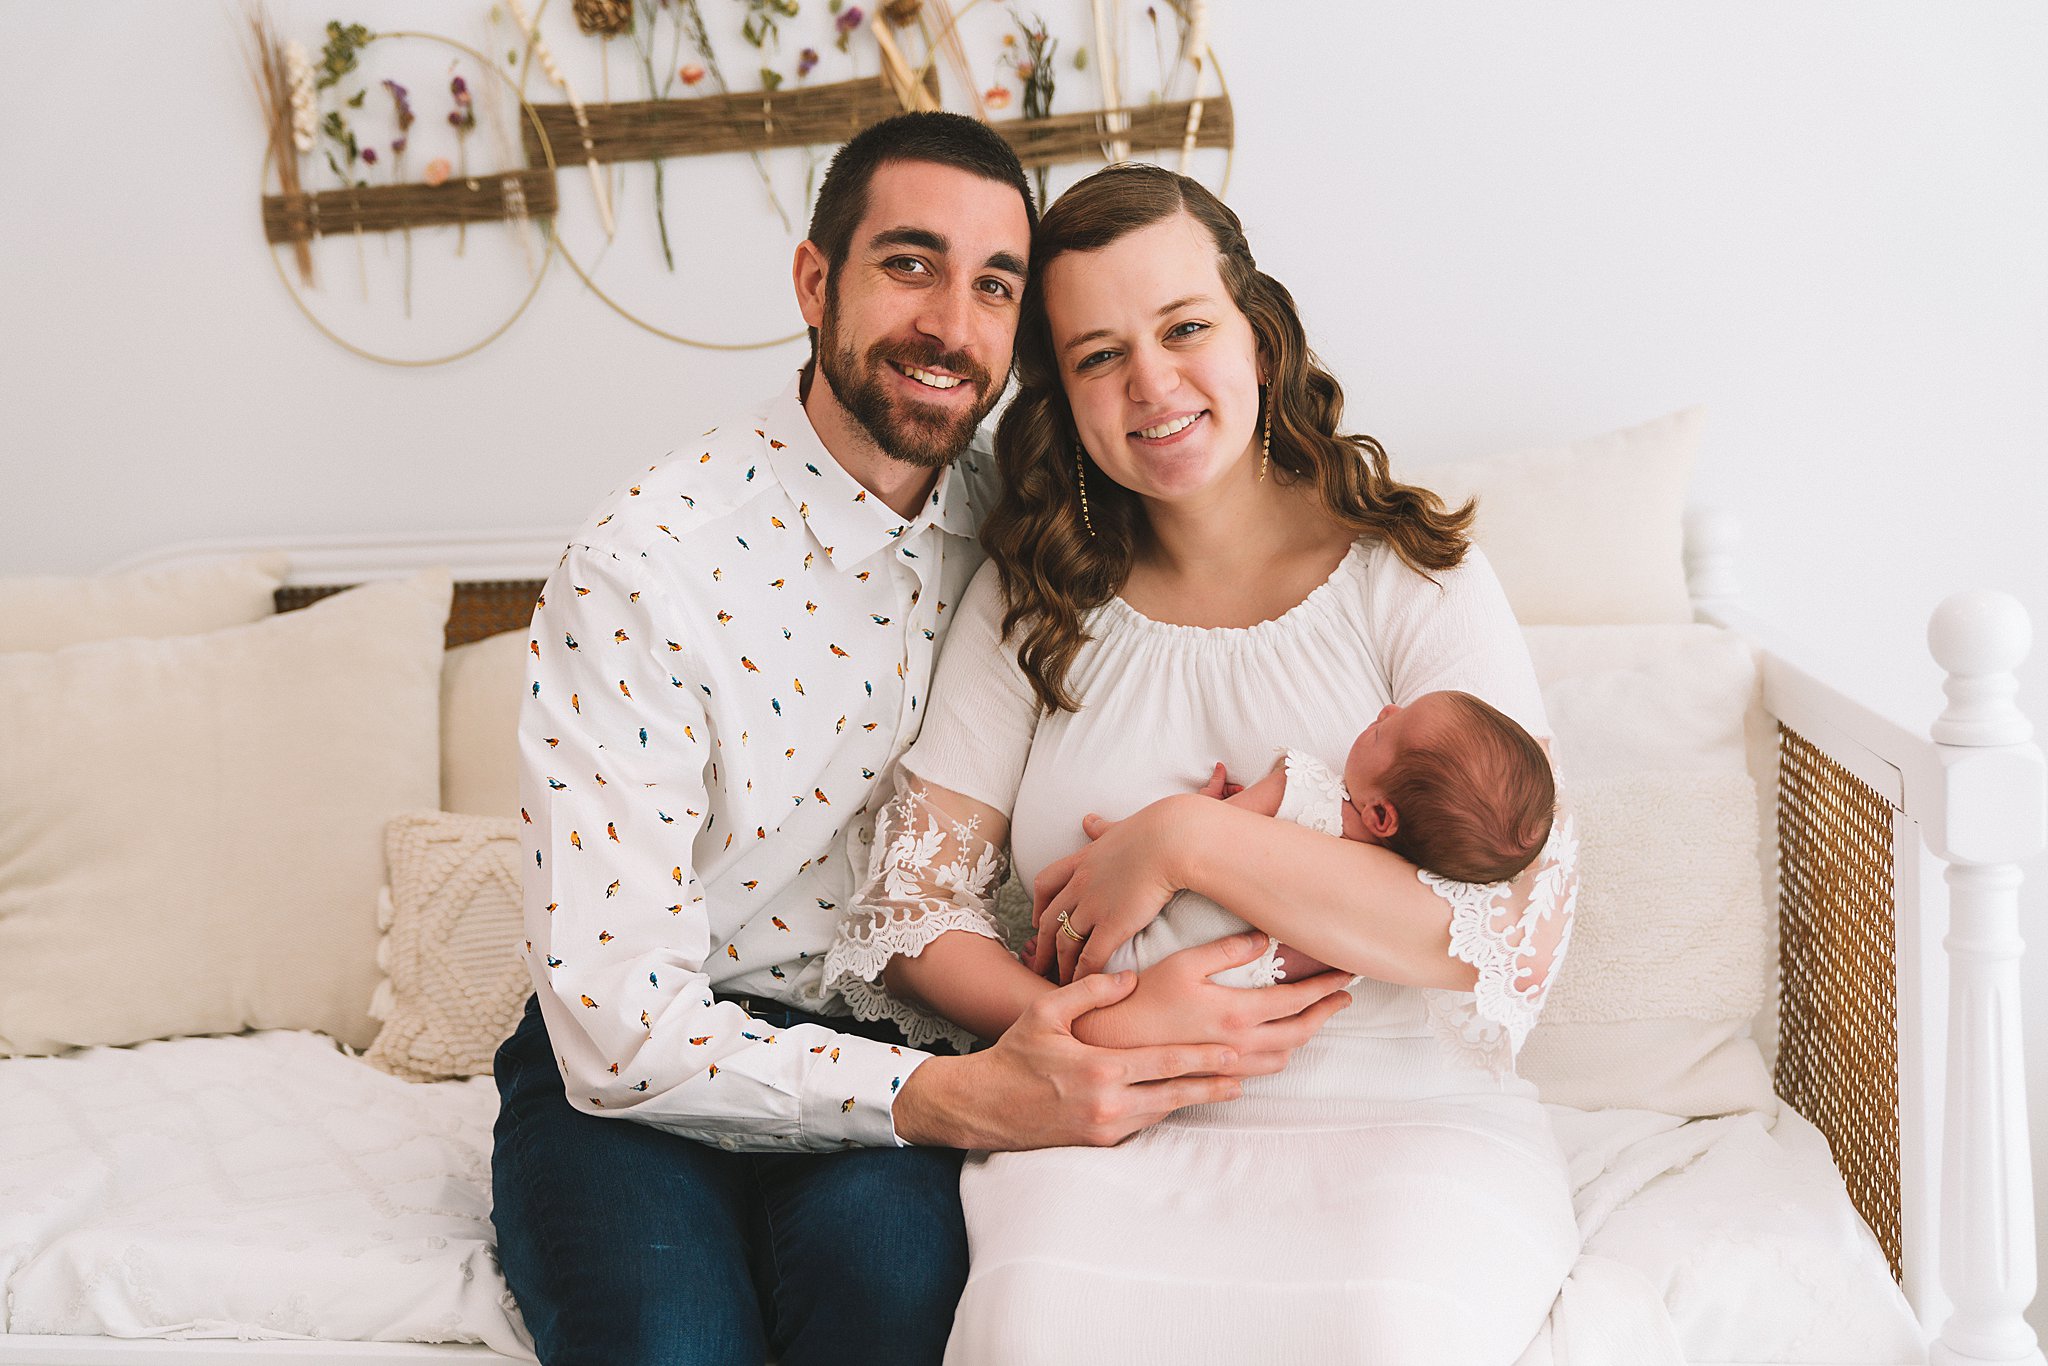 New parents sit on a couch in a studio while holding their newborn baby